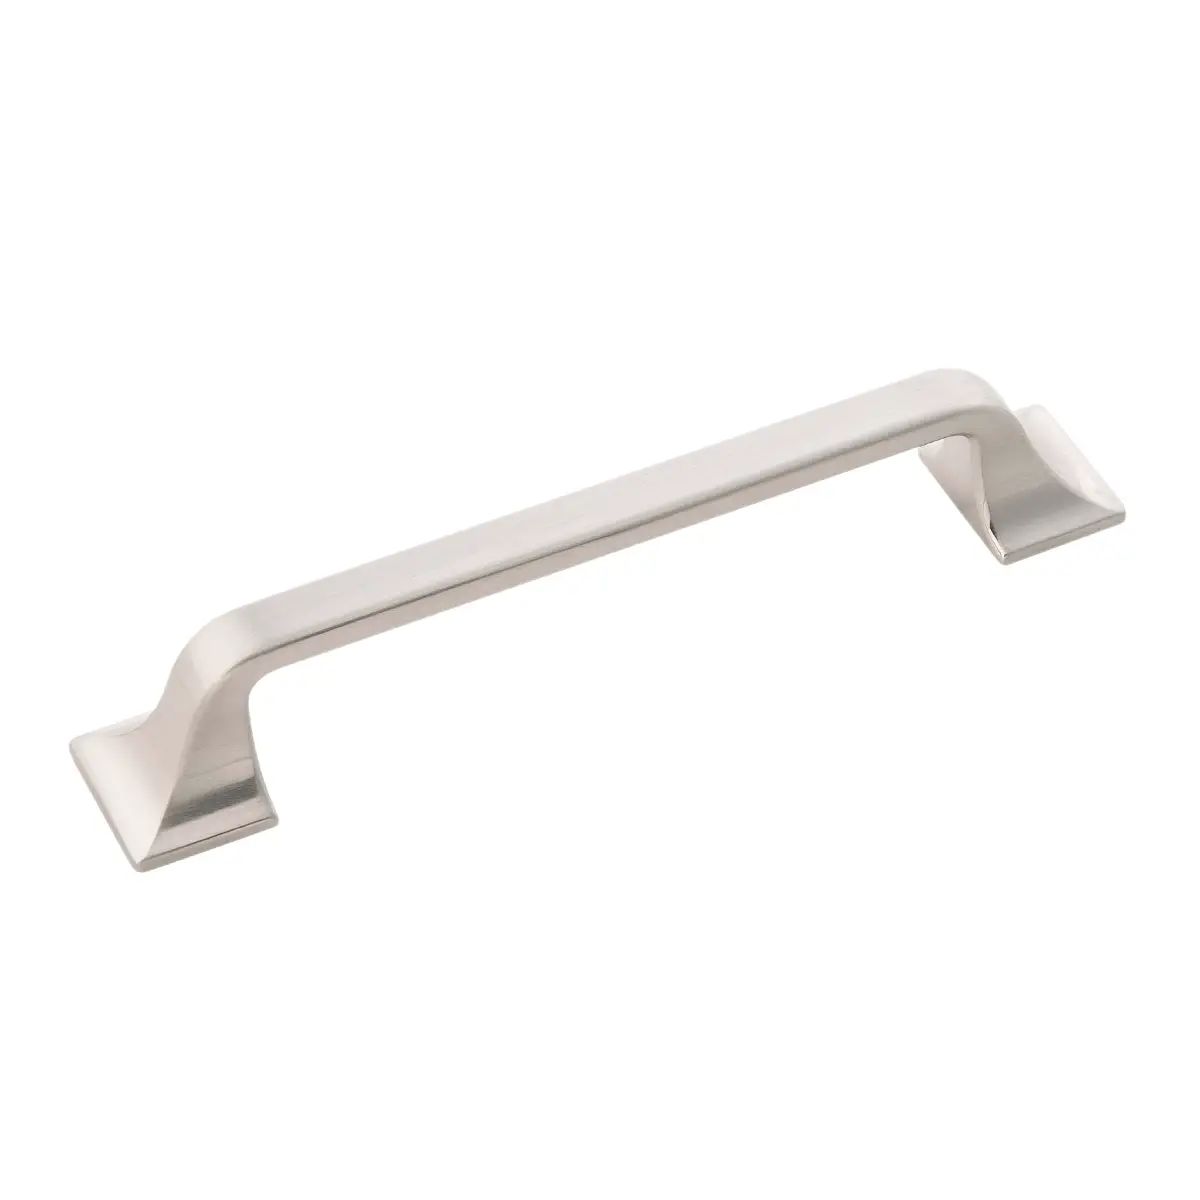 Hickory Hardware H076702-BI Black Iron Forge 5 Inch Center to Center Handle Cabinet Pull | Build.com, Inc.